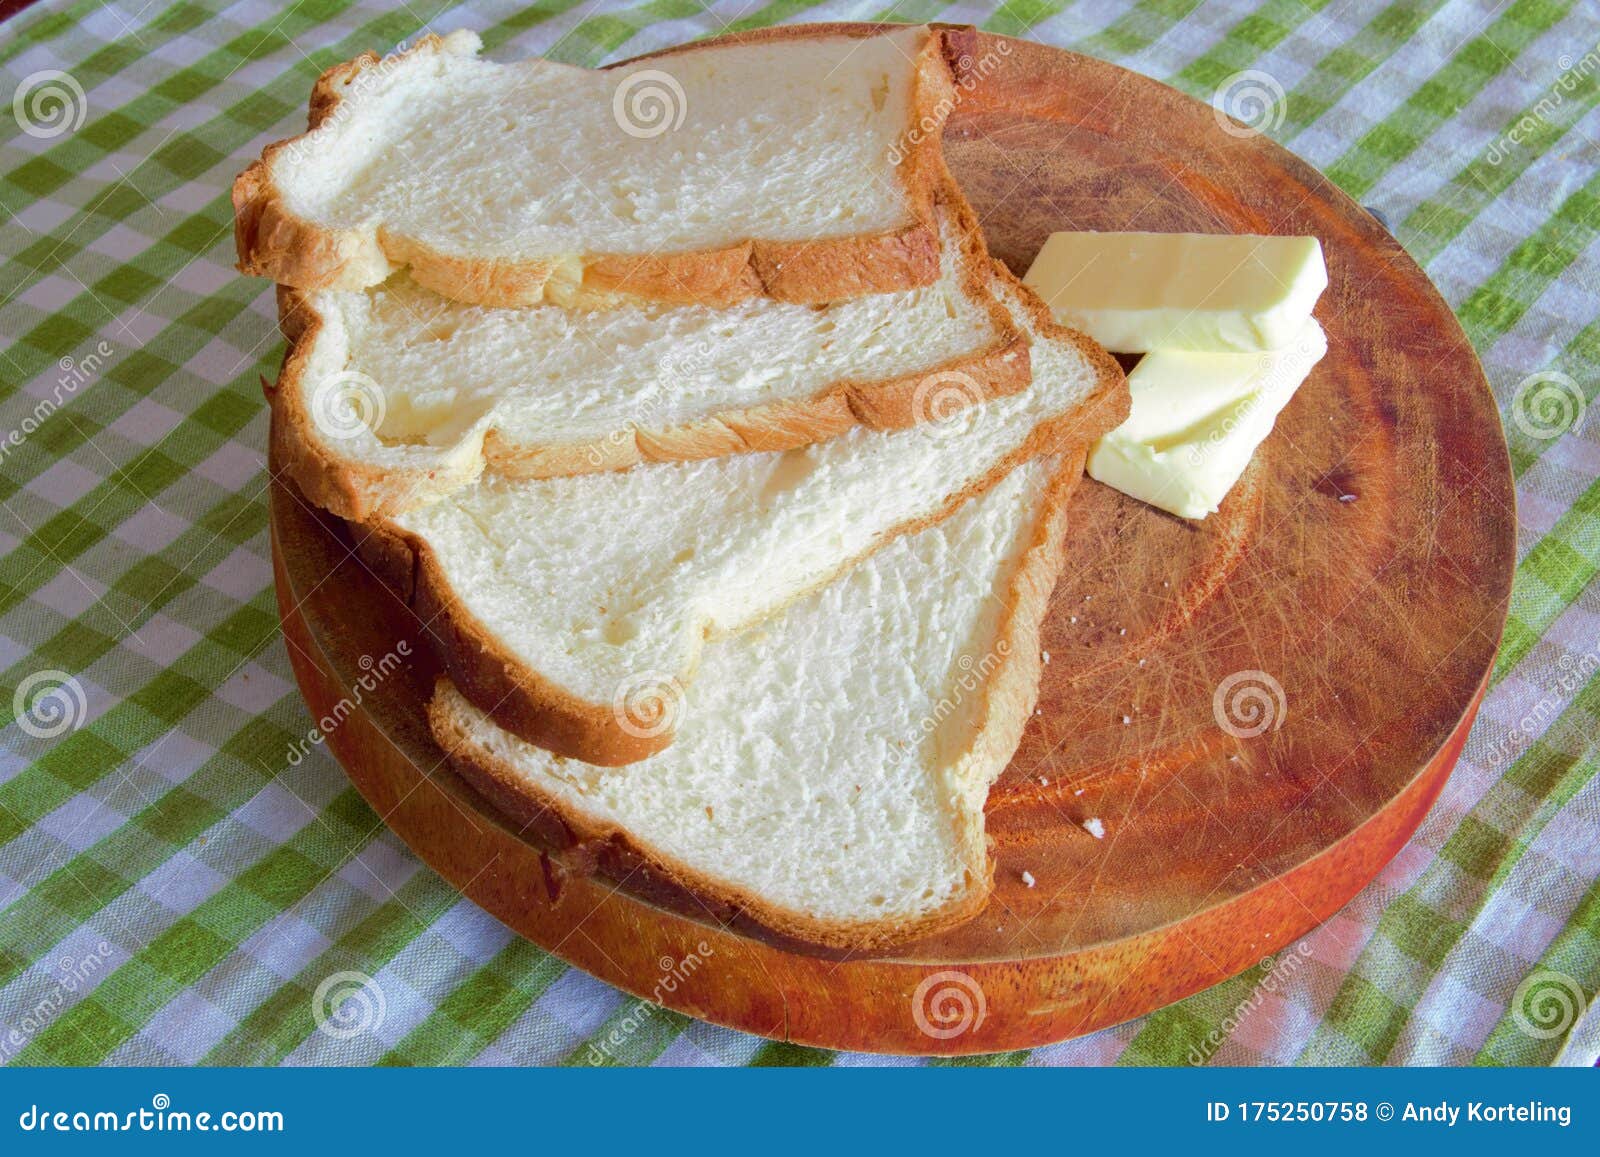 Bread And Butter On A Wooden Board And Green Table Cloth Stock Photo Image Of Filter Butter